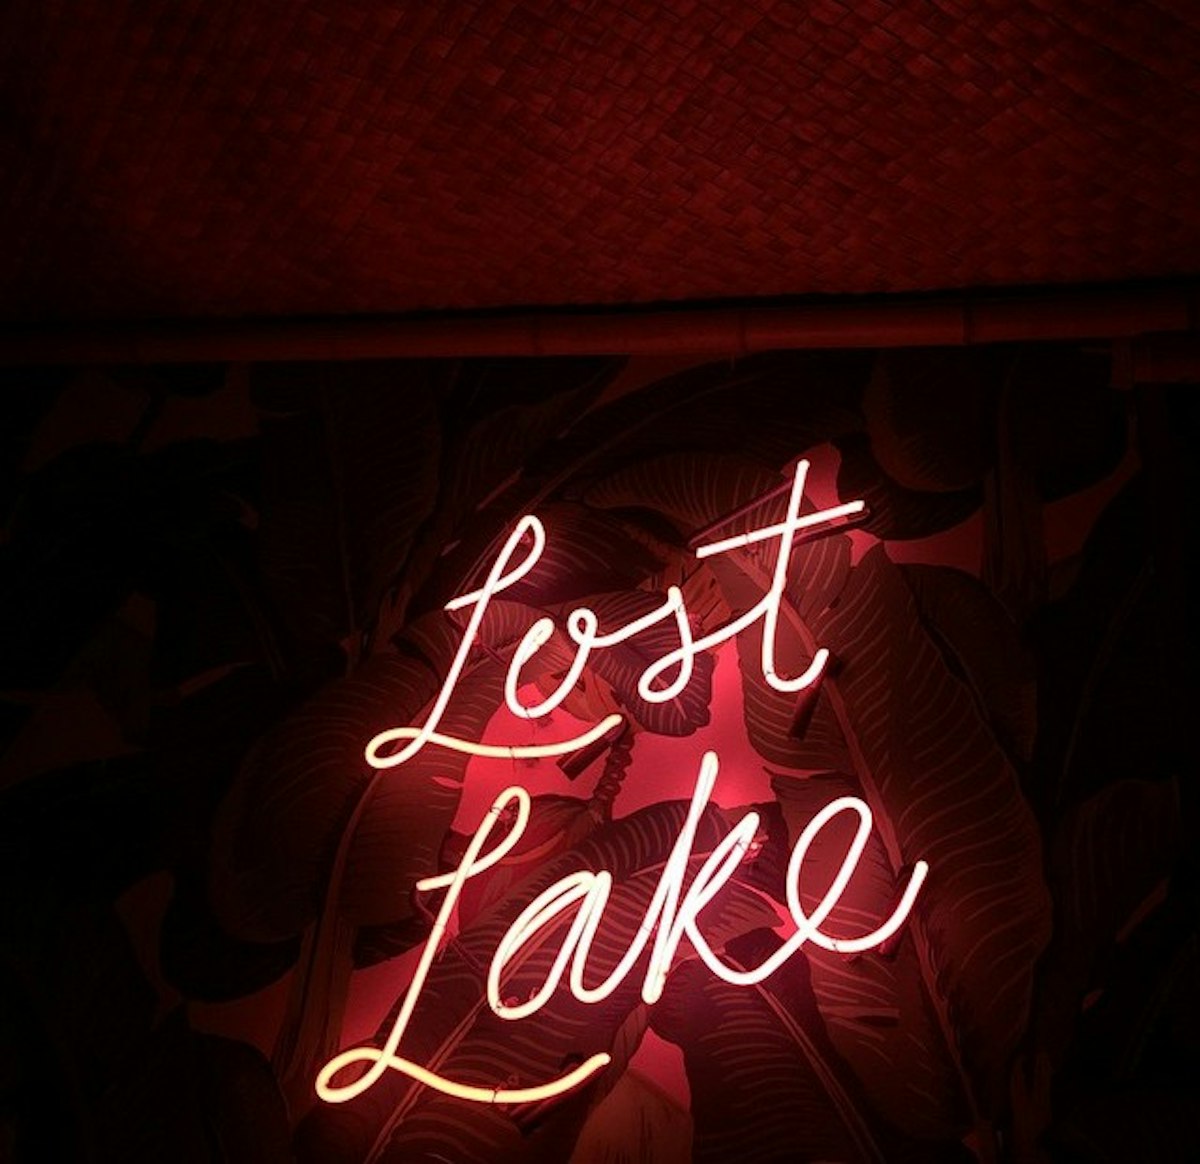 Lost Lake is a neighborhood tiki bar on the Northwest Side of Chicago.